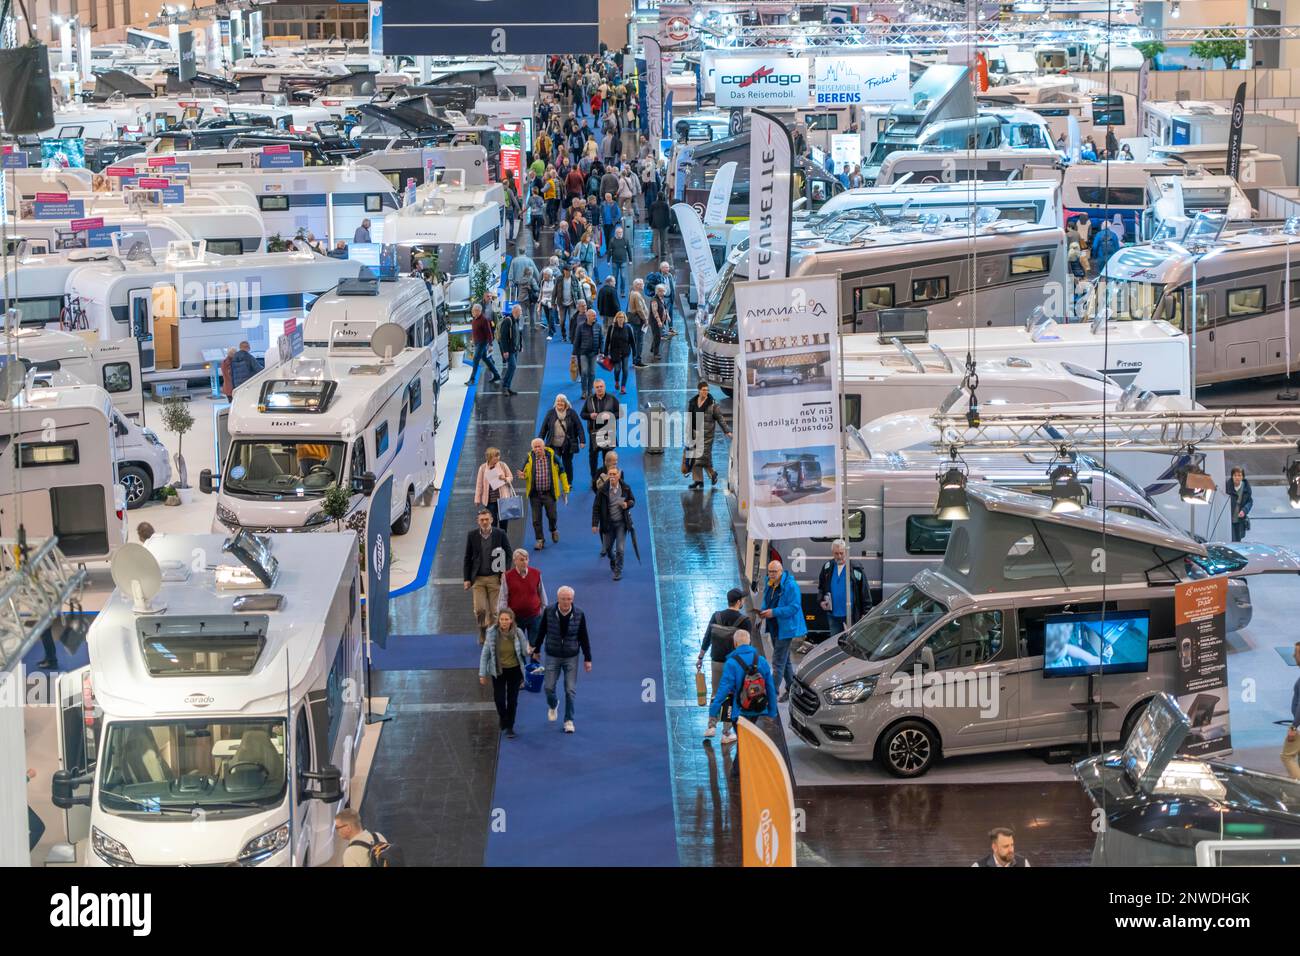 Travel and camping fair, caravans, motorhomes and everything to do with camping, travelling, tourism, are shown in the Essen exhibition halls, motorho Stock Photo